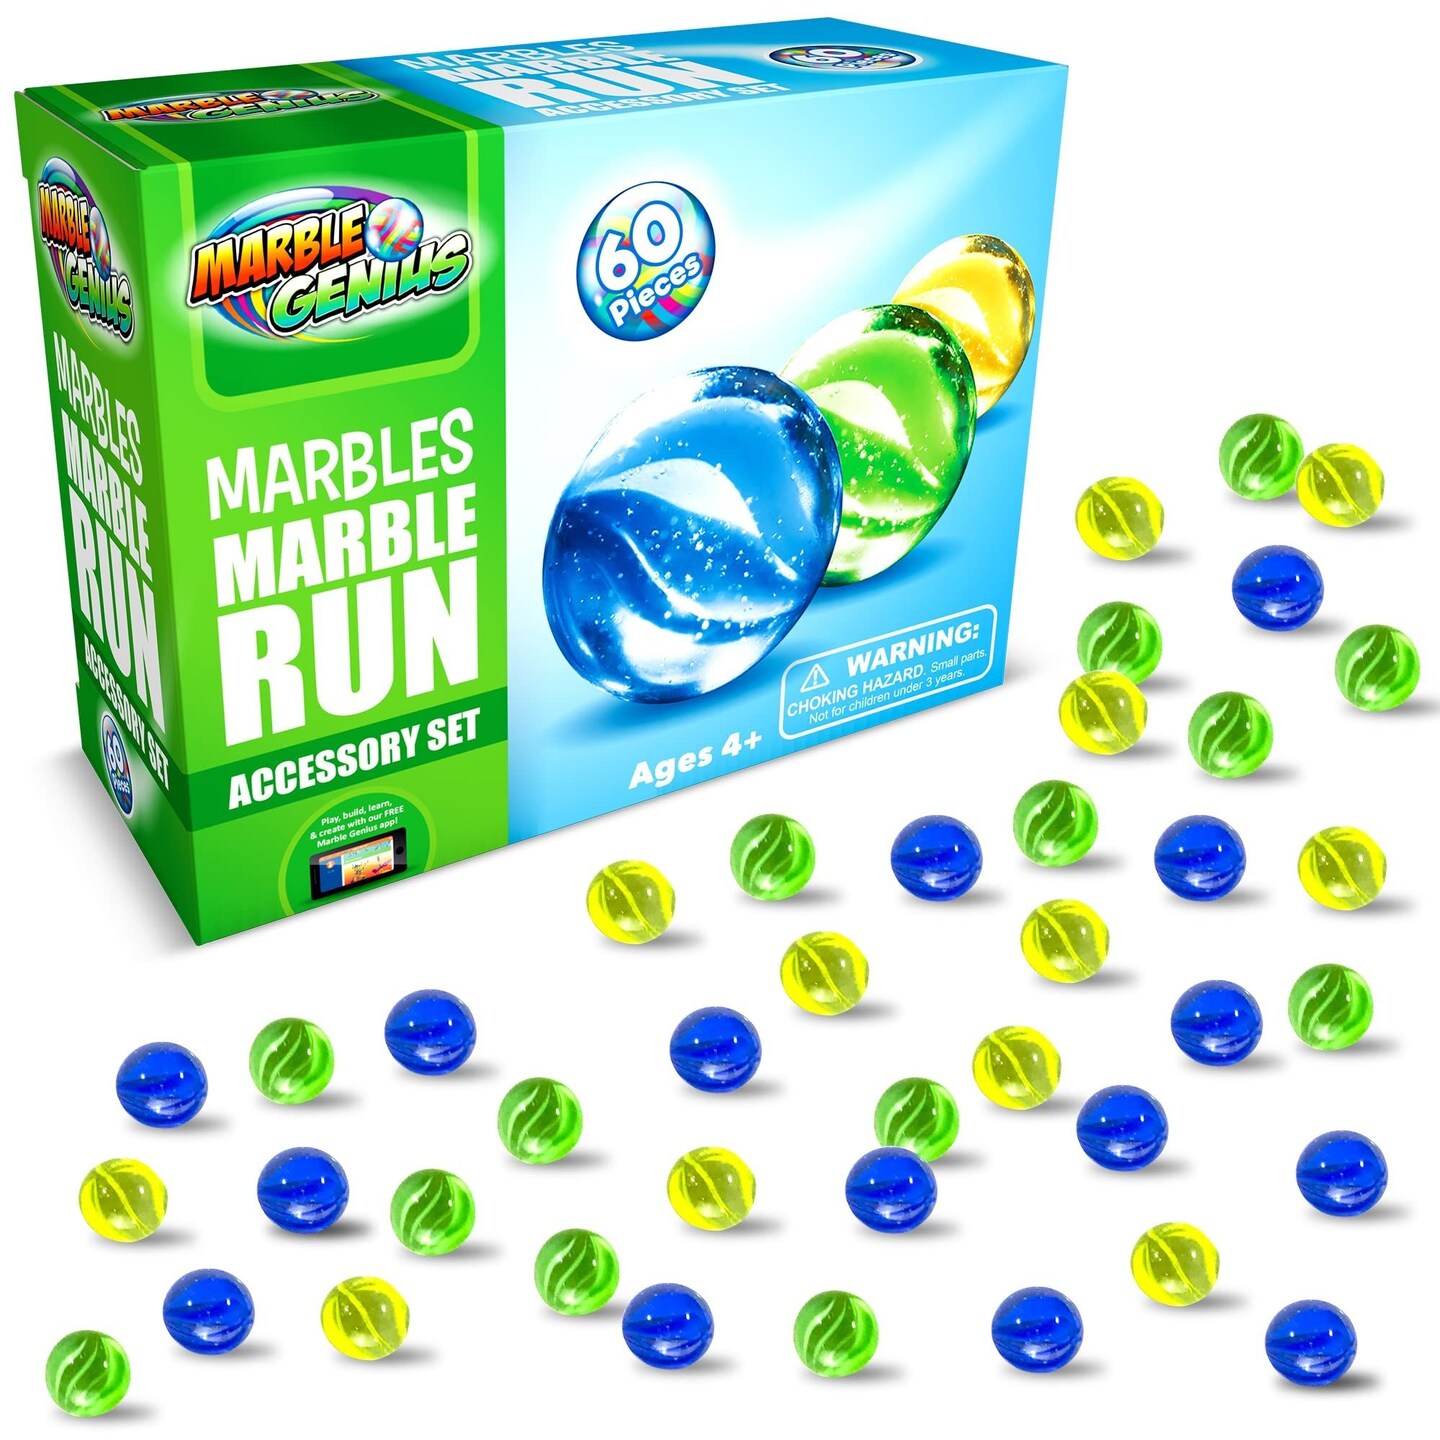 Marble Genius Marbles Accessory Add-On (60 Pieces) - High-Quality, Compatible with All Marble Genius Marble Run Sets, Made with Durable Materials to Ensure Long-Lasting Fun for Kids and Adults Alike